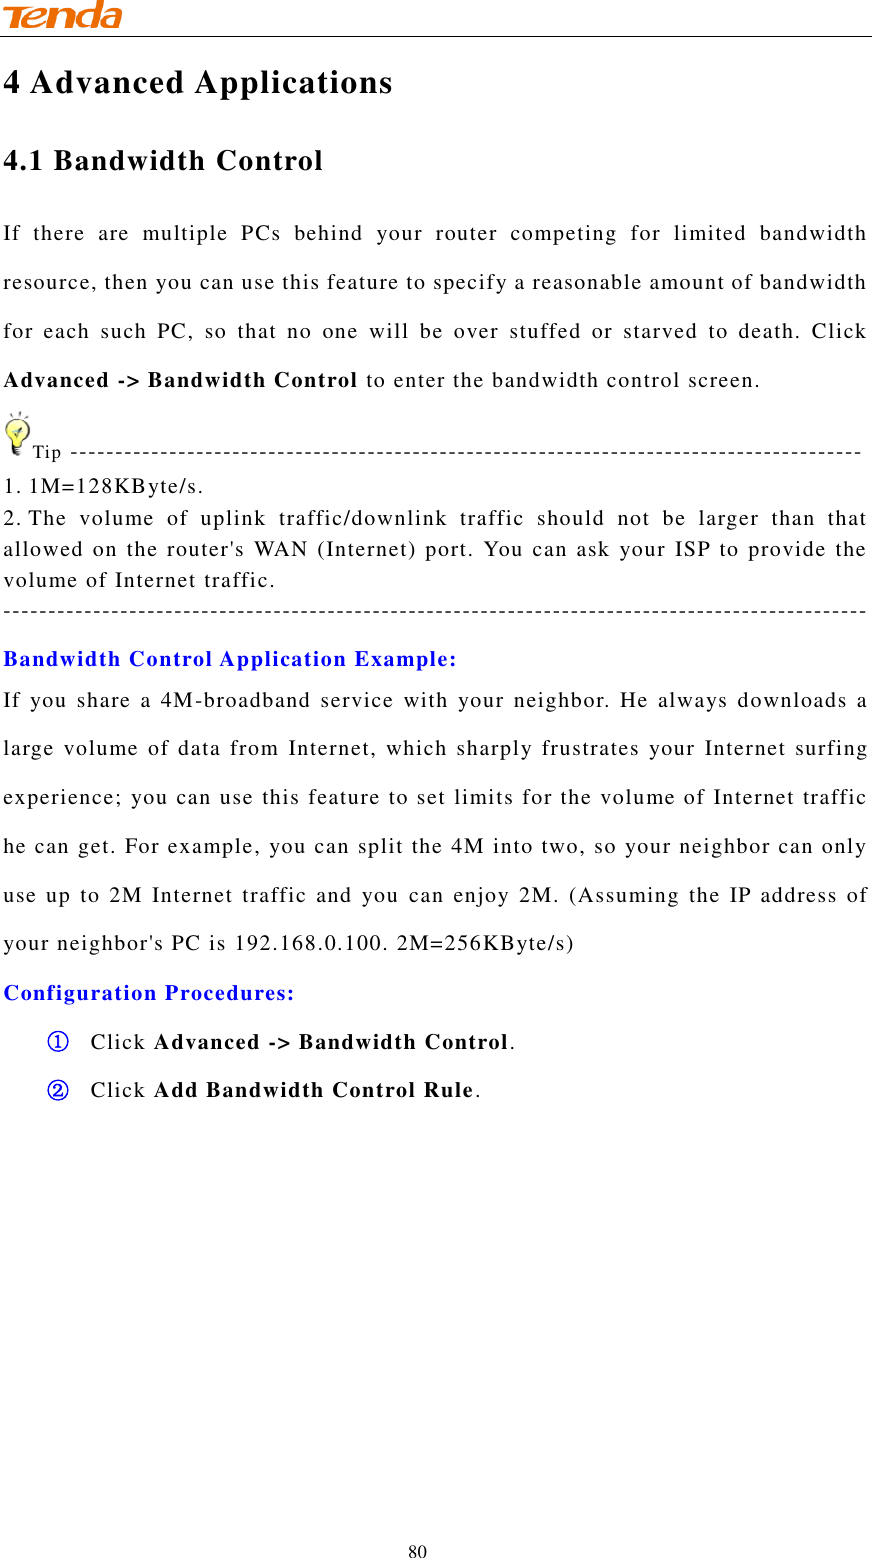                                    80 4 Advanced Applications 4.1 Bandwidth Control If  there  are  multiple  PCs  behind  your  router  competing  for  limited  bandwidth resource, then you can use this feature to specify a reasonable amount of bandwidth for  each  such  PC,  so  that  no  one  will  be  over  stuffed  or  starved  to  death.  Click Advanced -&gt; Bandwidth Control to enter the bandwidth control screen. Tip ---------------------------------------------------------------------------------------- 1. 1M=128KByte/s. 2. The  volume  of  uplink  traffic/downlink  traffic  should  not  be  larger  than  that allowed on the router&apos;s WAN (Internet) port. You can  ask  your  ISP to provide the volume of Internet traffic. ------------------------------------------------------------------------------------------------ Bandwidth Control Application Example: If  you  share  a  4M-broadband  service  with  your  neighbor.  He  always  downloads  a large  volume  of  data  from  Internet,  which  sharply frustrates  your  Internet  surfing experience; you can use this feature to set limits for the volume of Internet traffic he can get. For example, you can split the 4M into two, so your neighbor can only use up  to  2M  Internet  traffic  and  you  can  enjoy  2M. (Assuming  the IP  address  of your neighbor&apos;s PC is 192.168.0.100. 2M=256KByte/s) Configuration Procedures: ① Click Advanced -&gt; Bandwidth Control. ② Click Add Bandwidth Control Rule. 